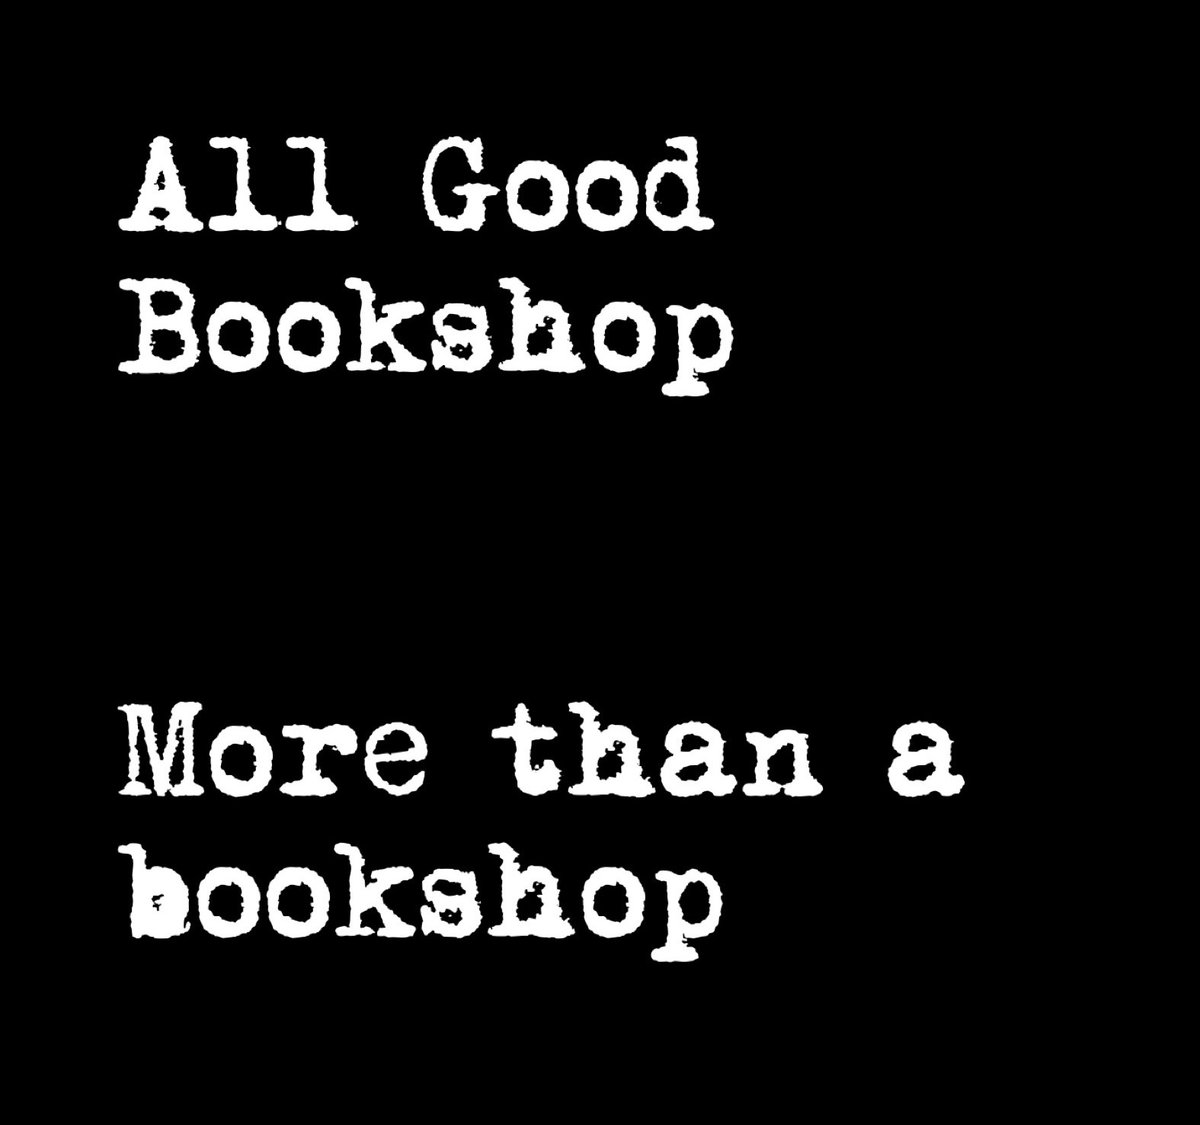 ok so i'm tired dr who tired at this point i'd rather be asleep but i'm here the shop is open coffee on come buy books then all will be good #haringeybookshop #haringey #books #bookshop #n8